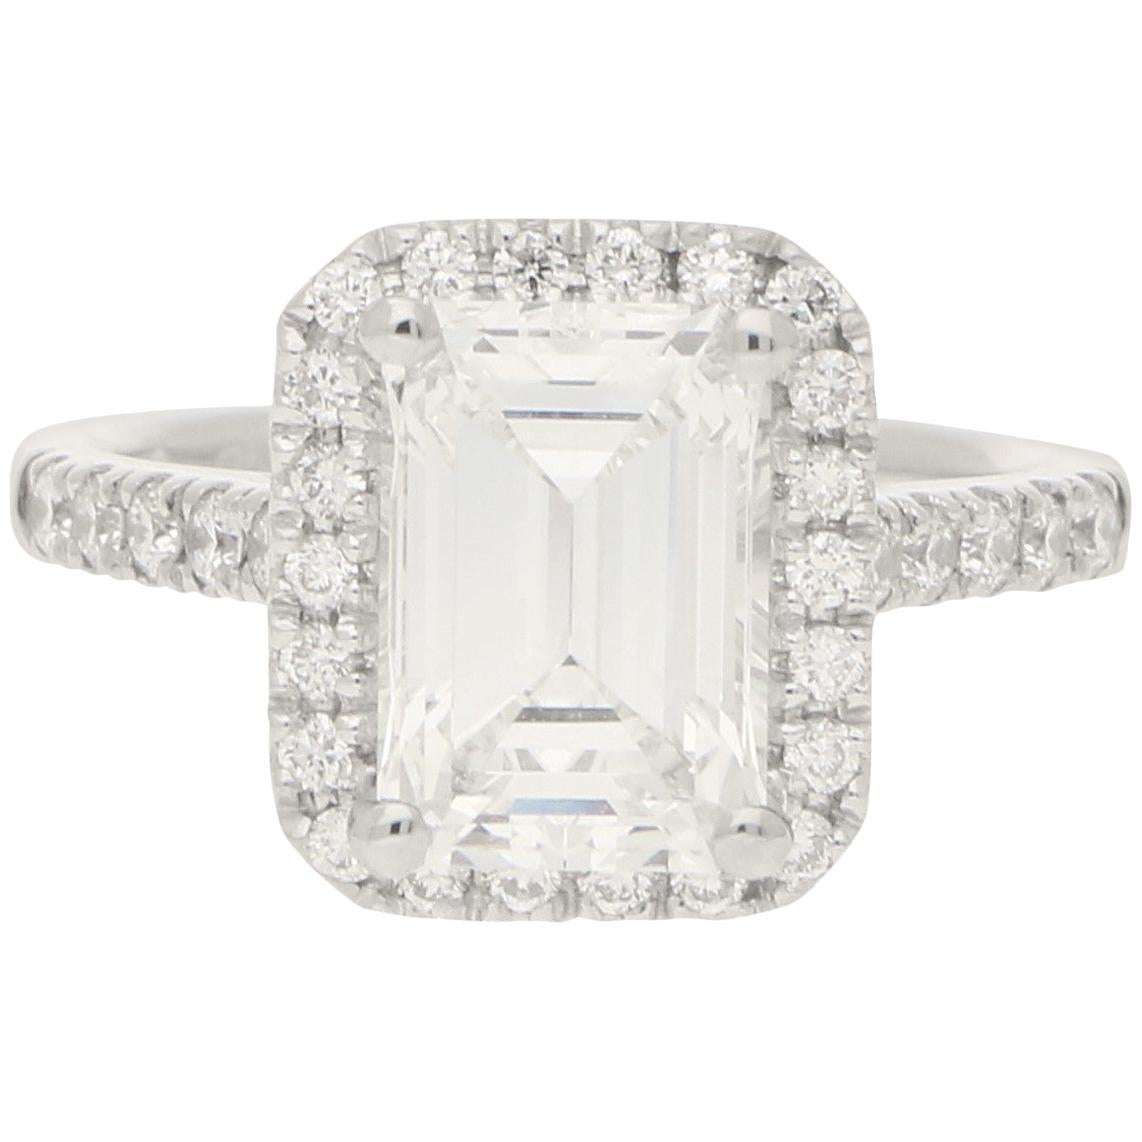 GIA Certified 2.45 Carat Emerald Cut Halo Cluster Engagement Ring in Platinum